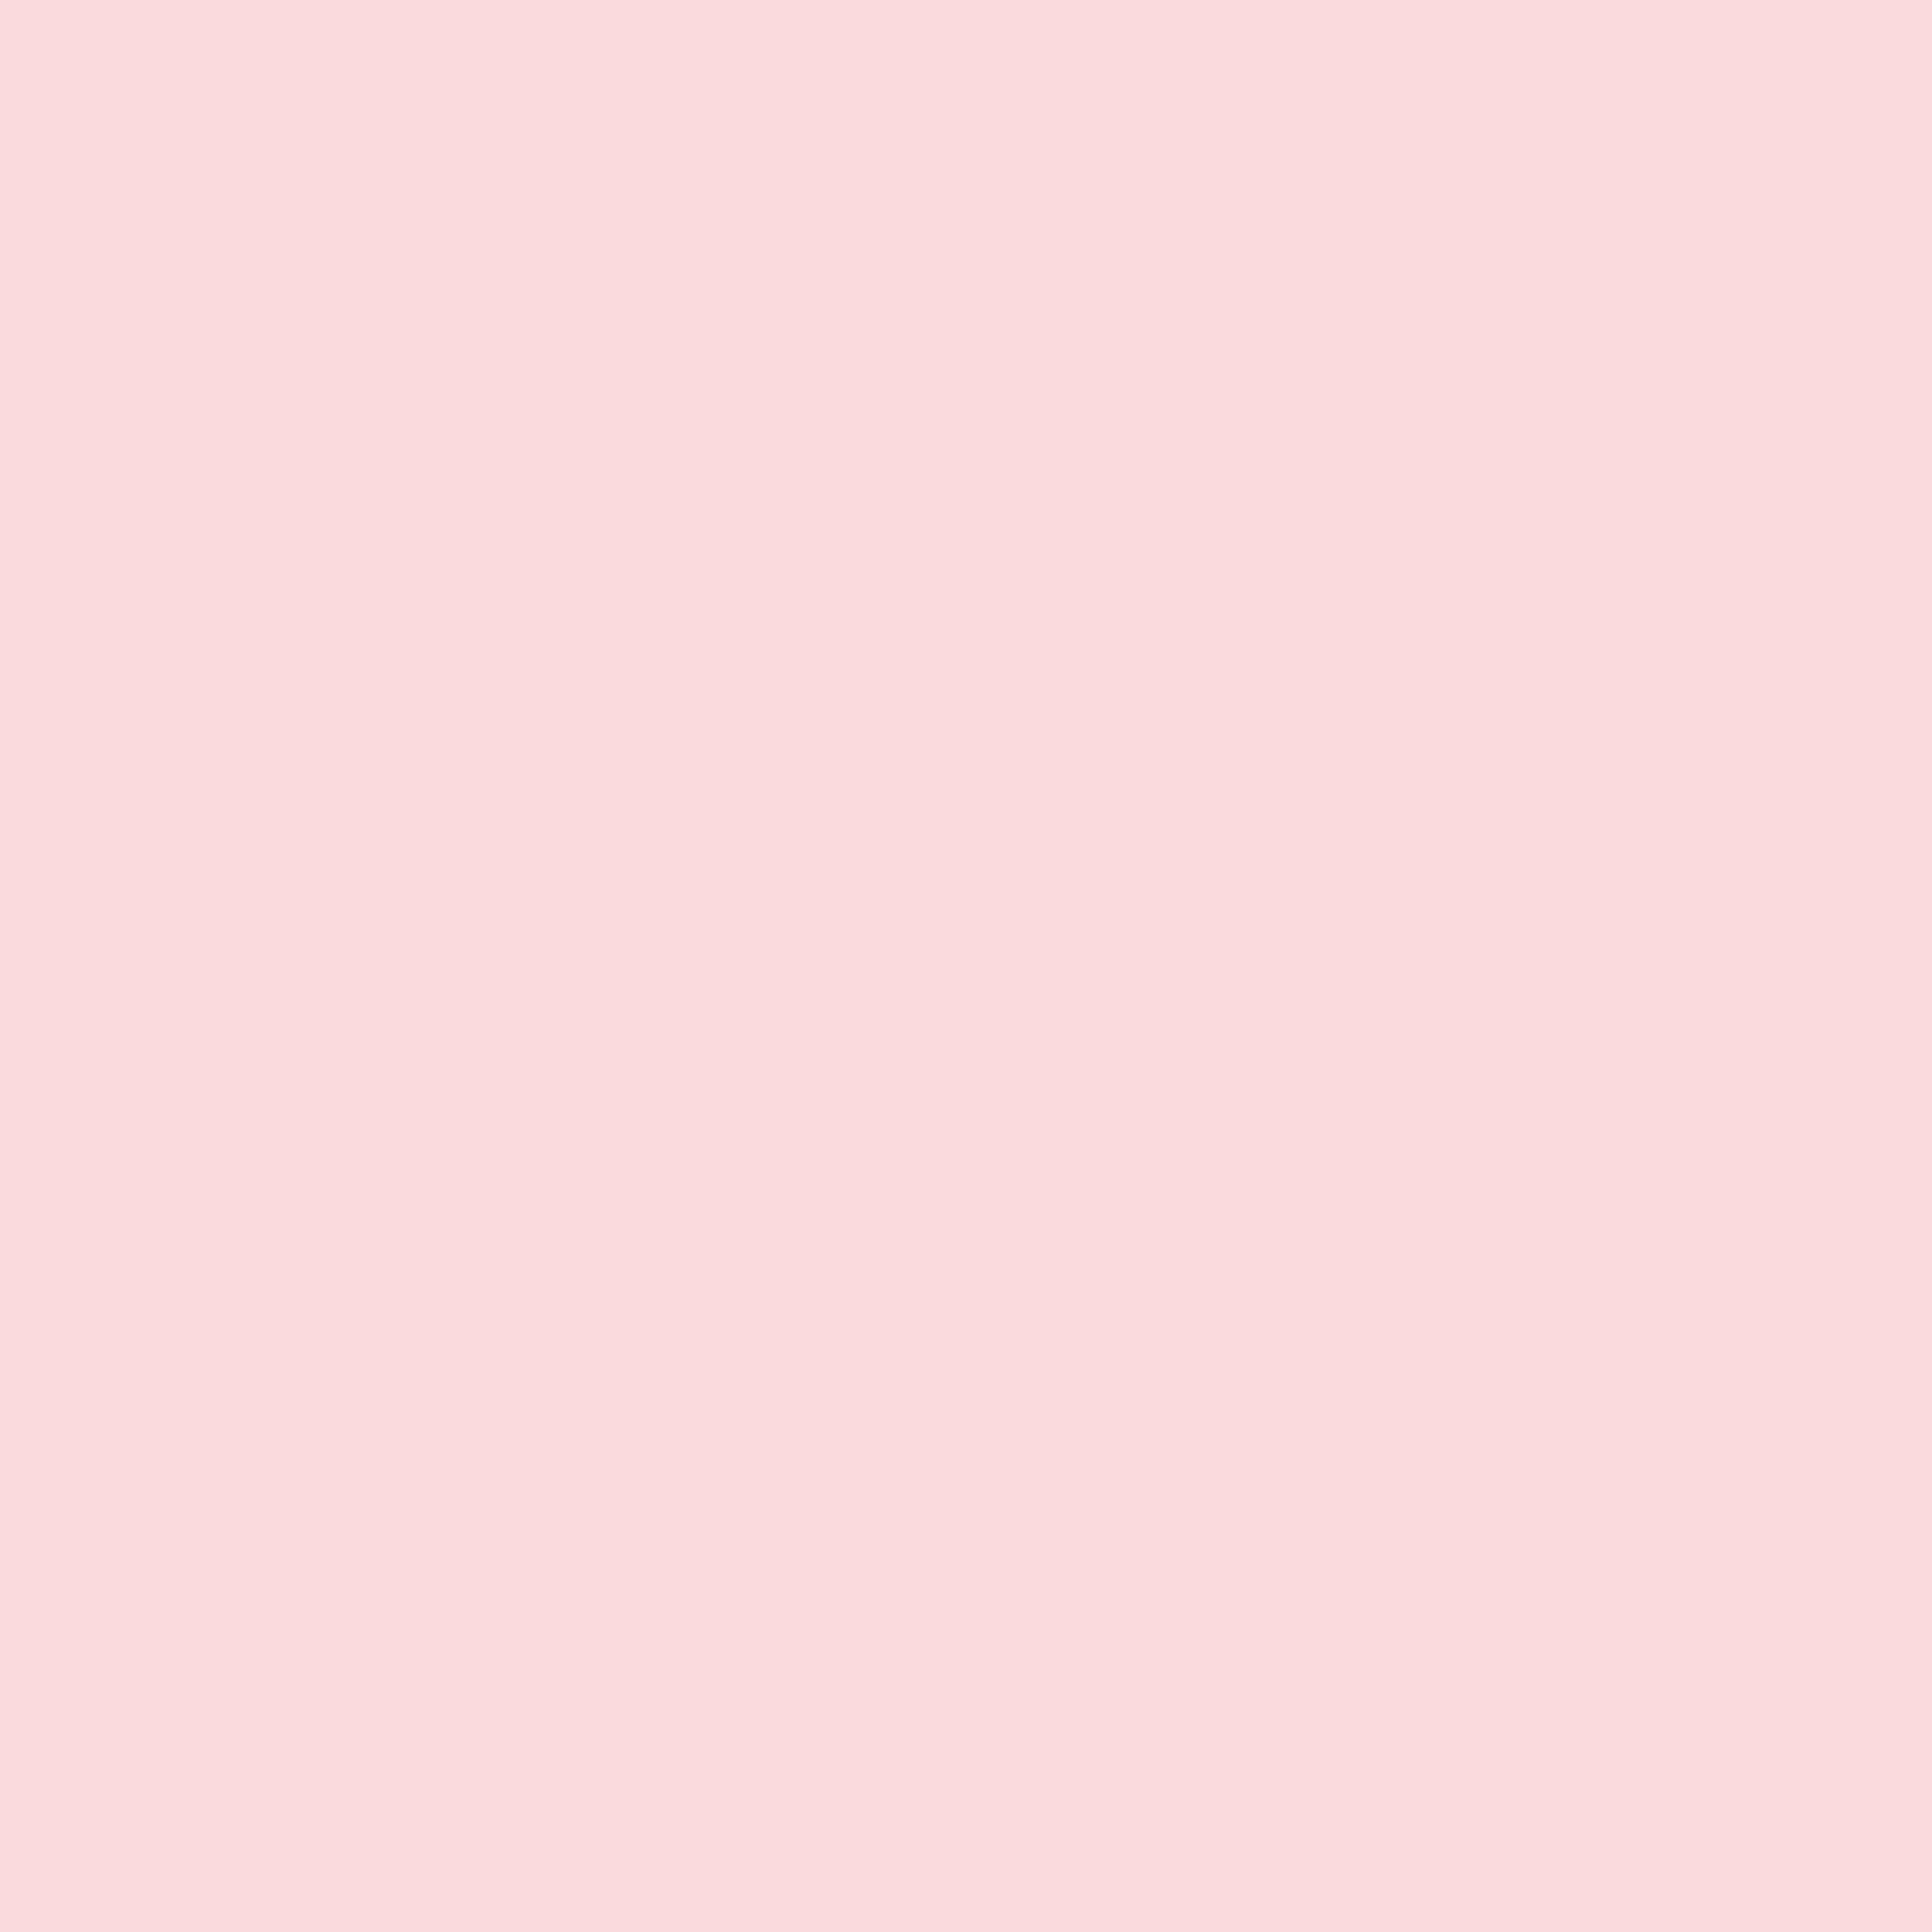 3600x3600 Pale Pink Solid Color Background